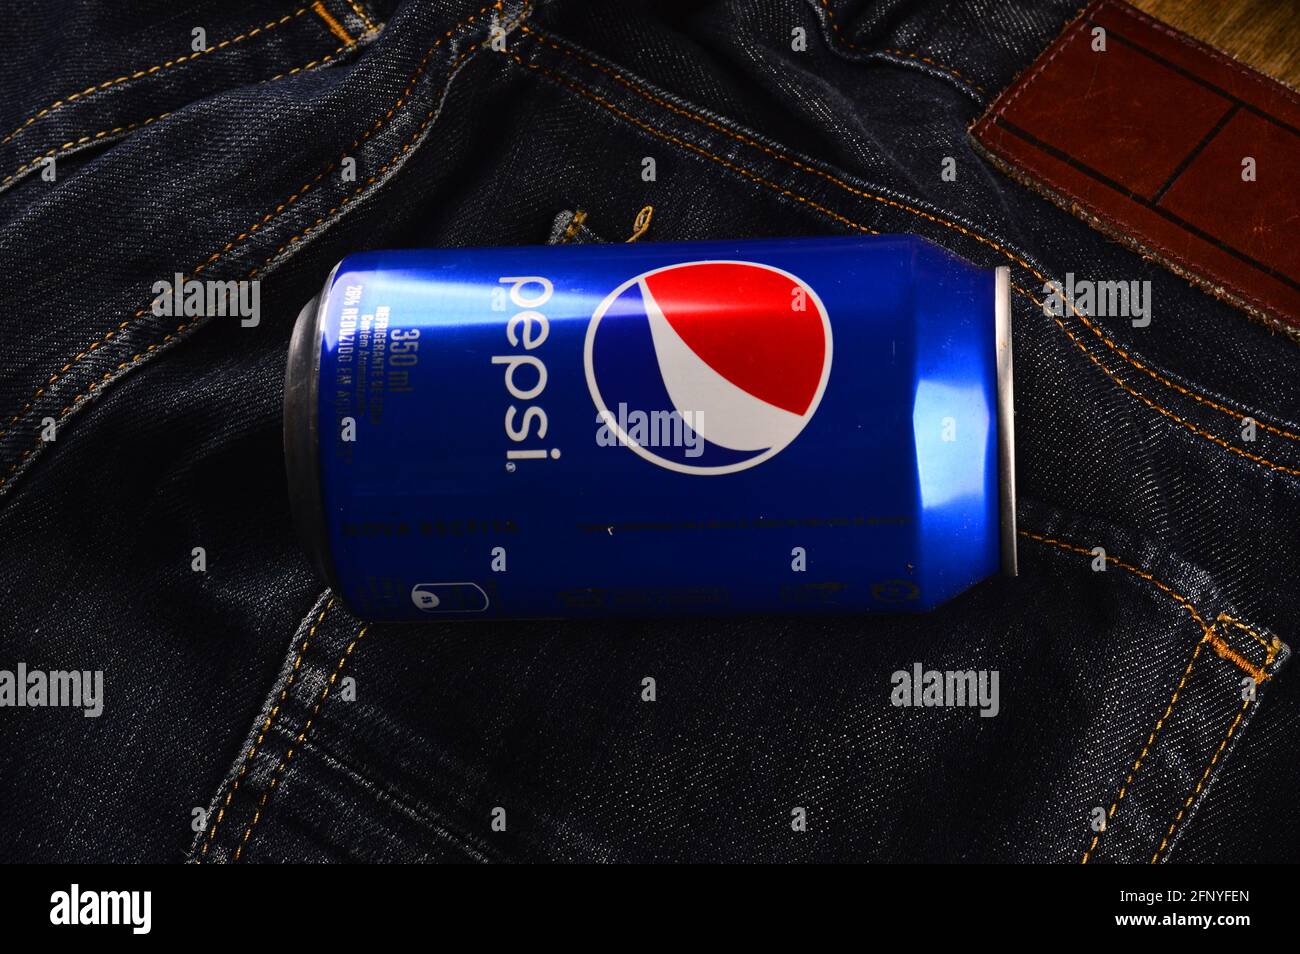 Pepsi soda can on the table Stock Photo - Alamy